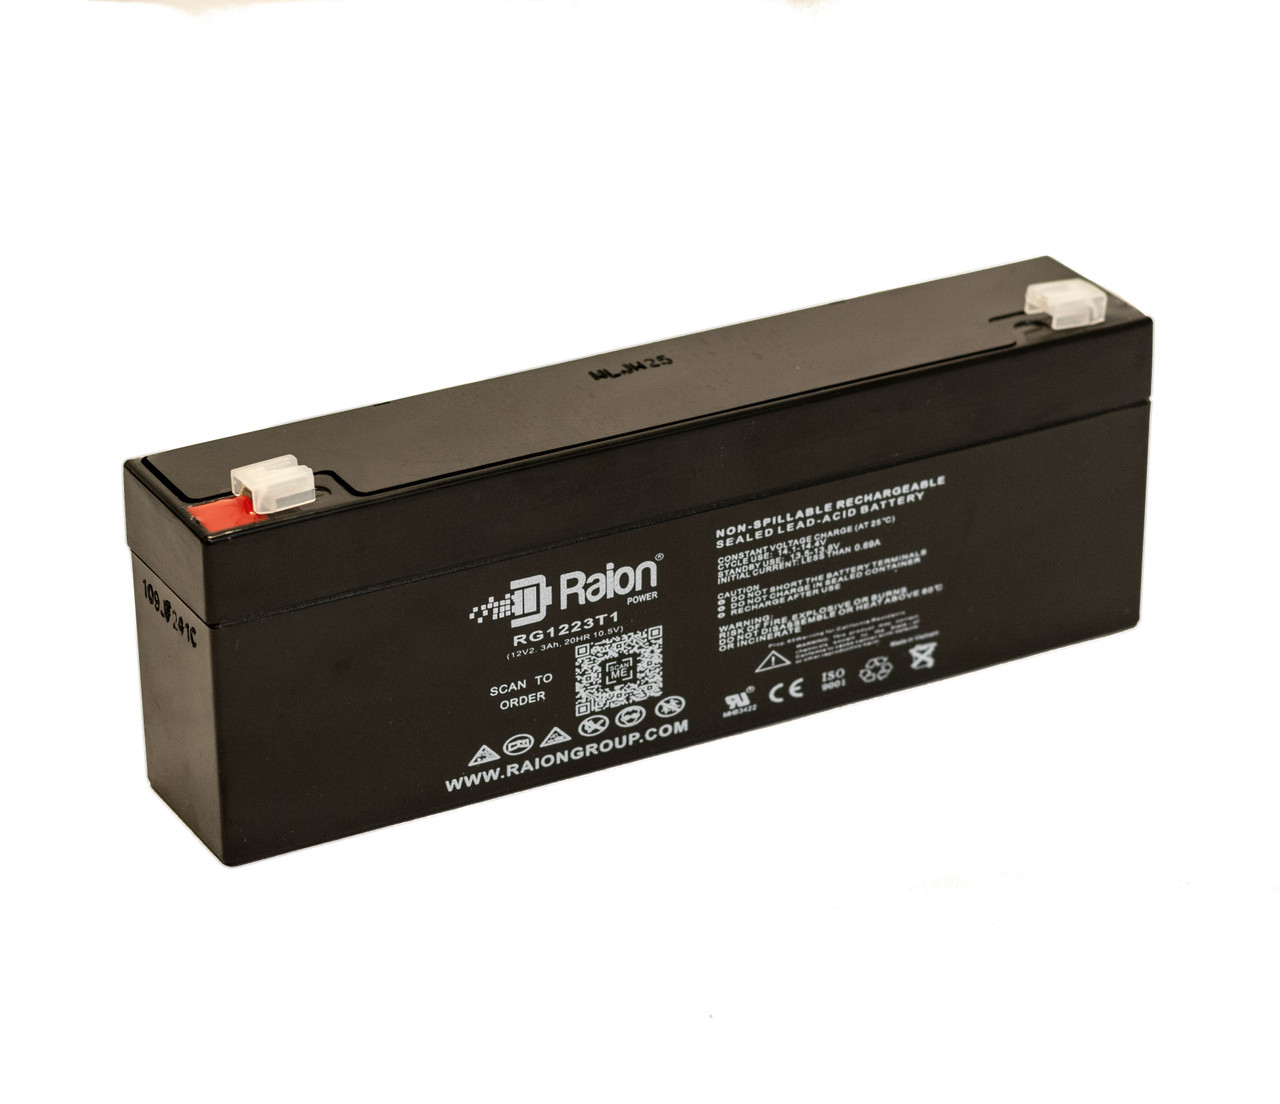 Raion Power RG1223T1 Replacement Battery for Avi 400 Pump